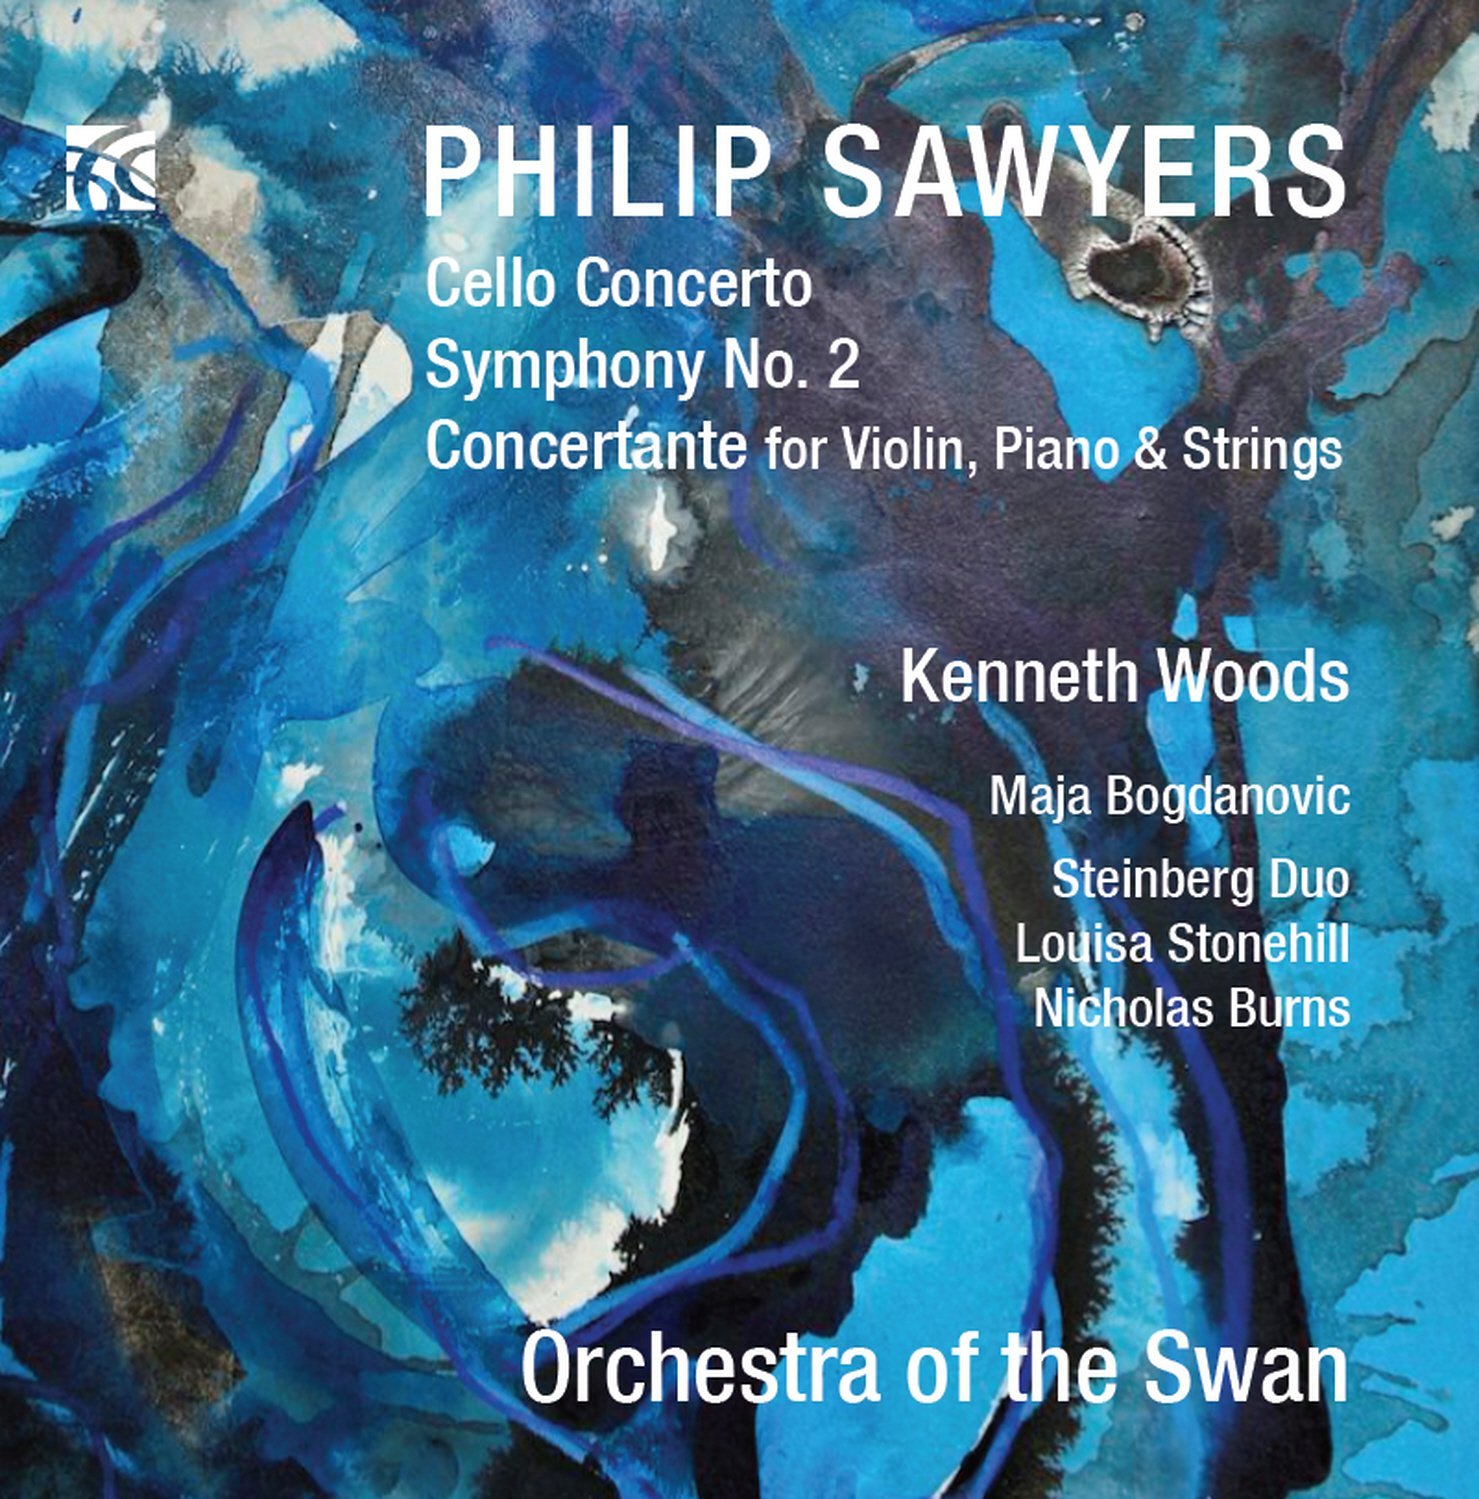 CD Review- Music and Vision Daily on Philip Sawyers- Orchestral Music